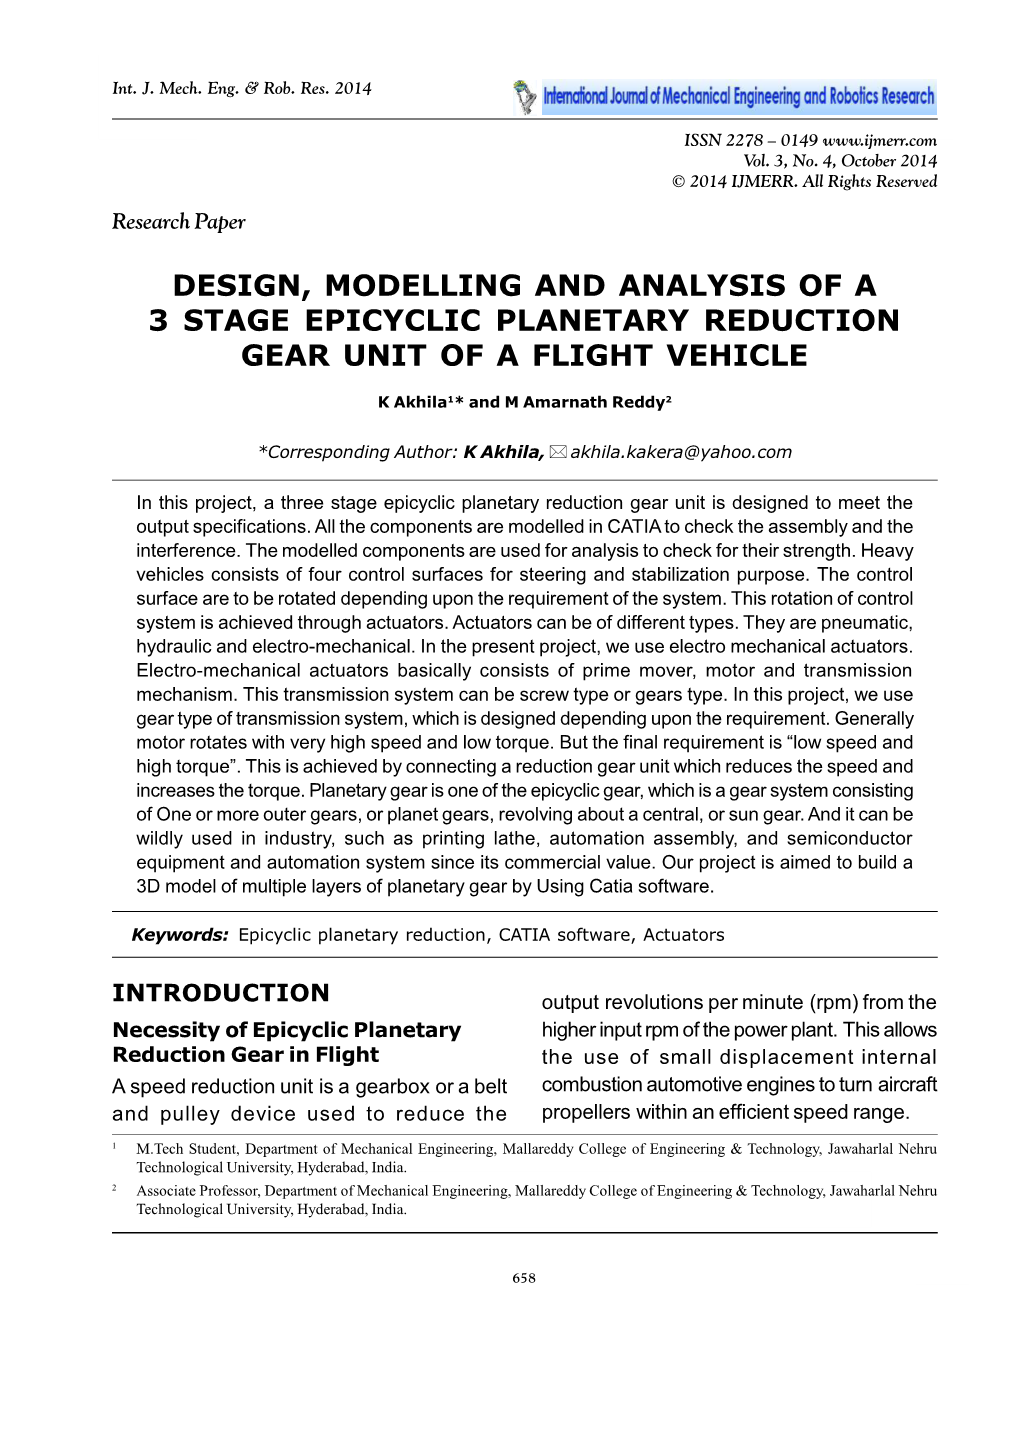 Design, Modelling and Analysis of a 3 Stage Epicyclic Planetary Reduction Gear Unit of a Flight Vehicle